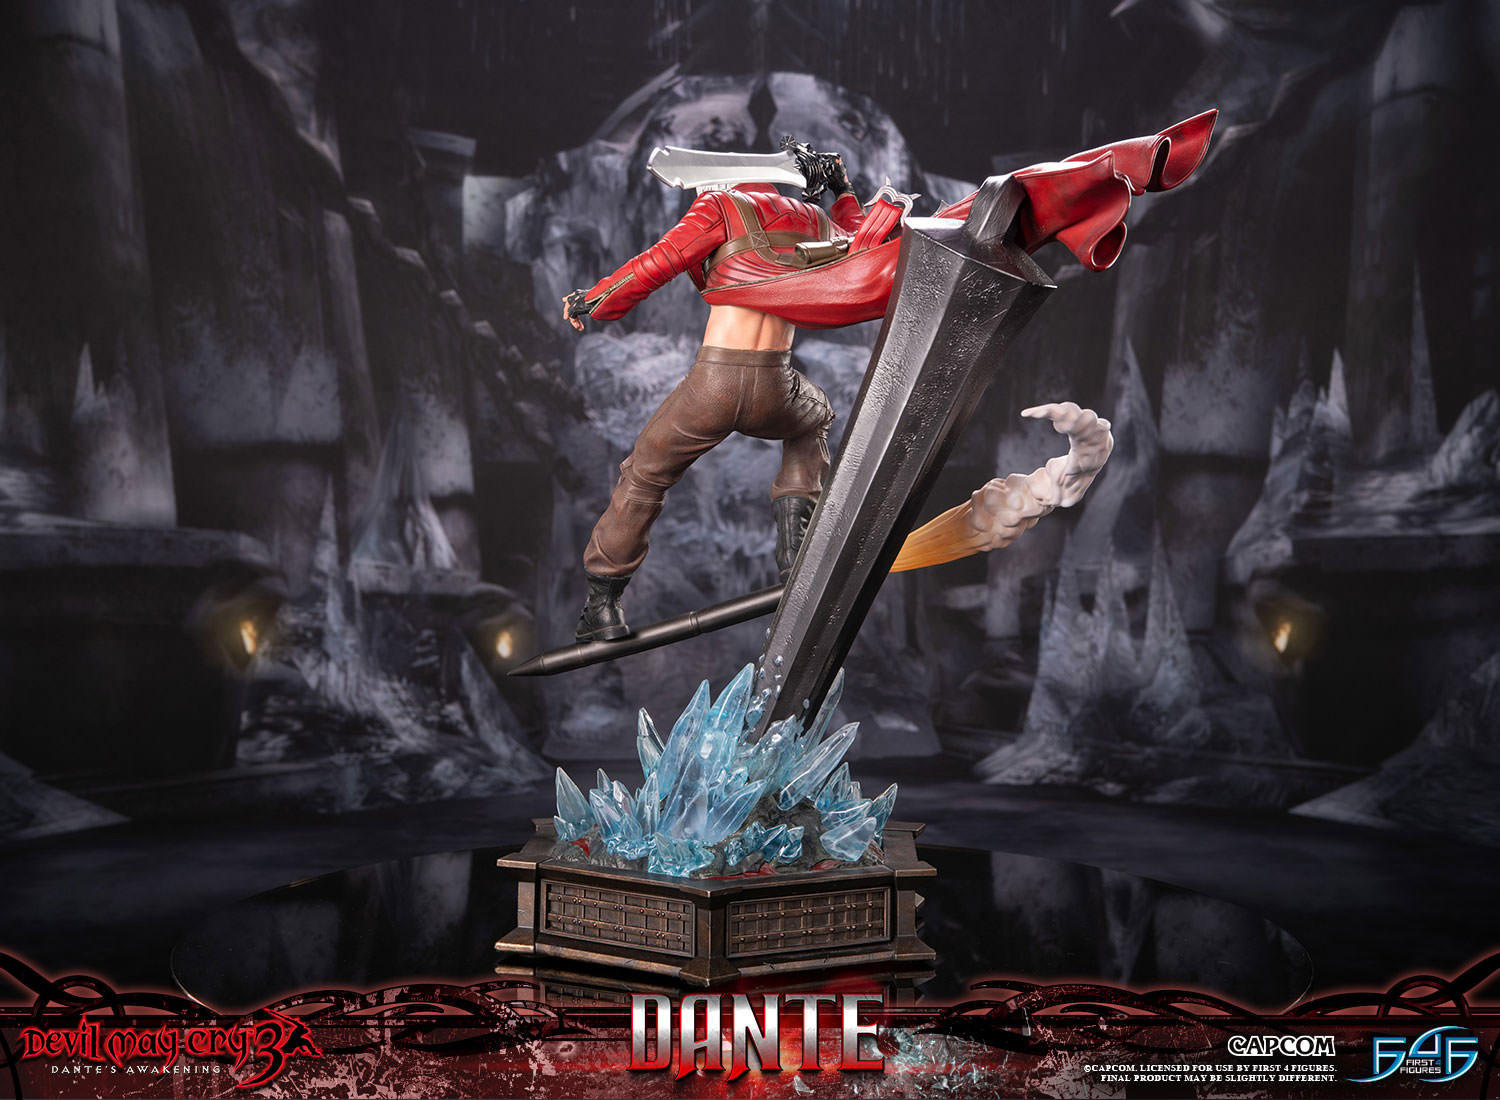 First 4 Figures - DMC3 Dante v4 - whiter, straighter hair and smaller nose.  Opinions please!